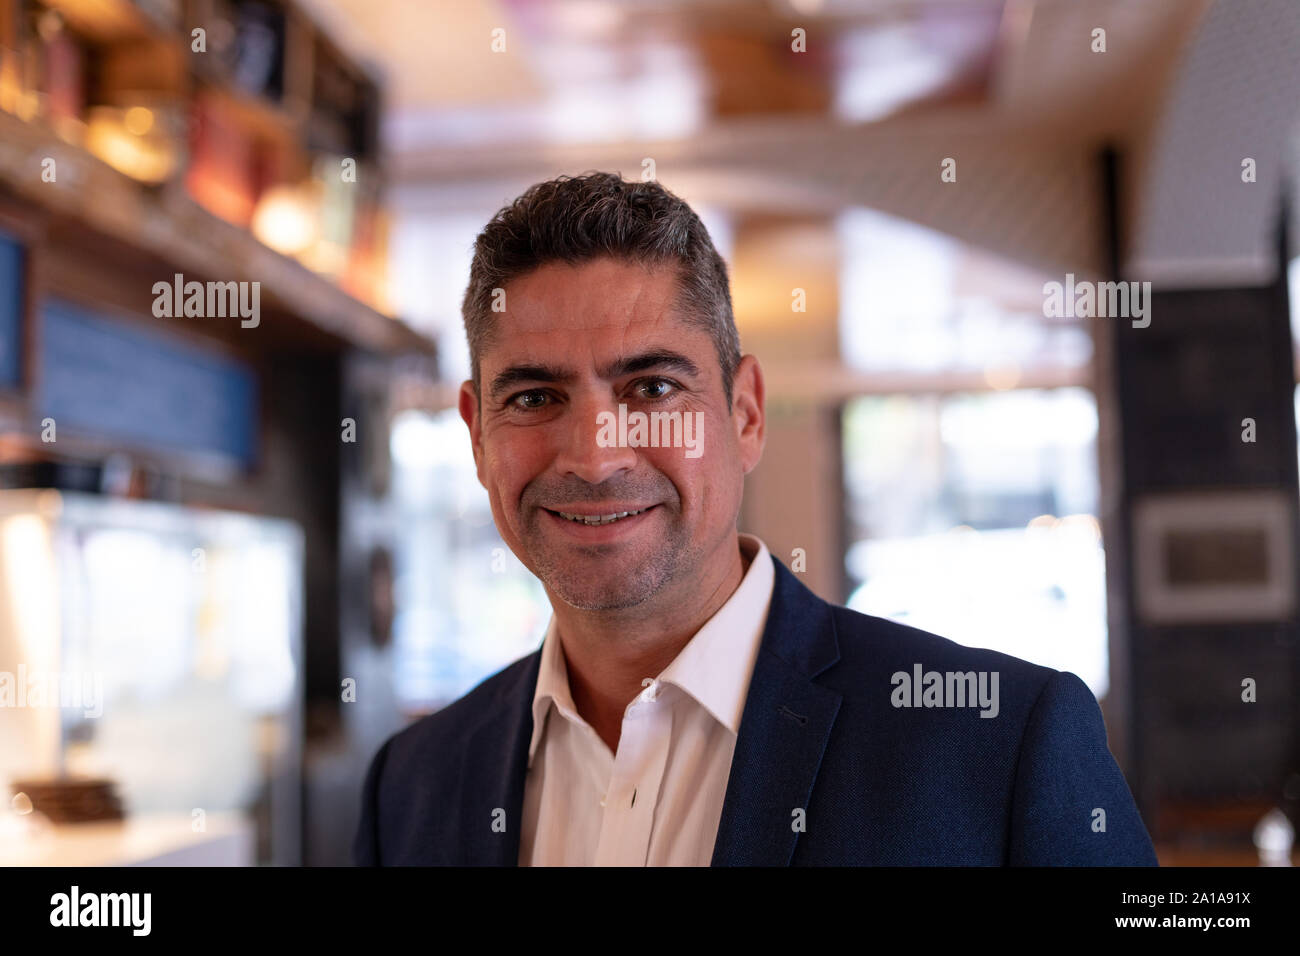 Portrait of male manager in a restaurant Stock Photo